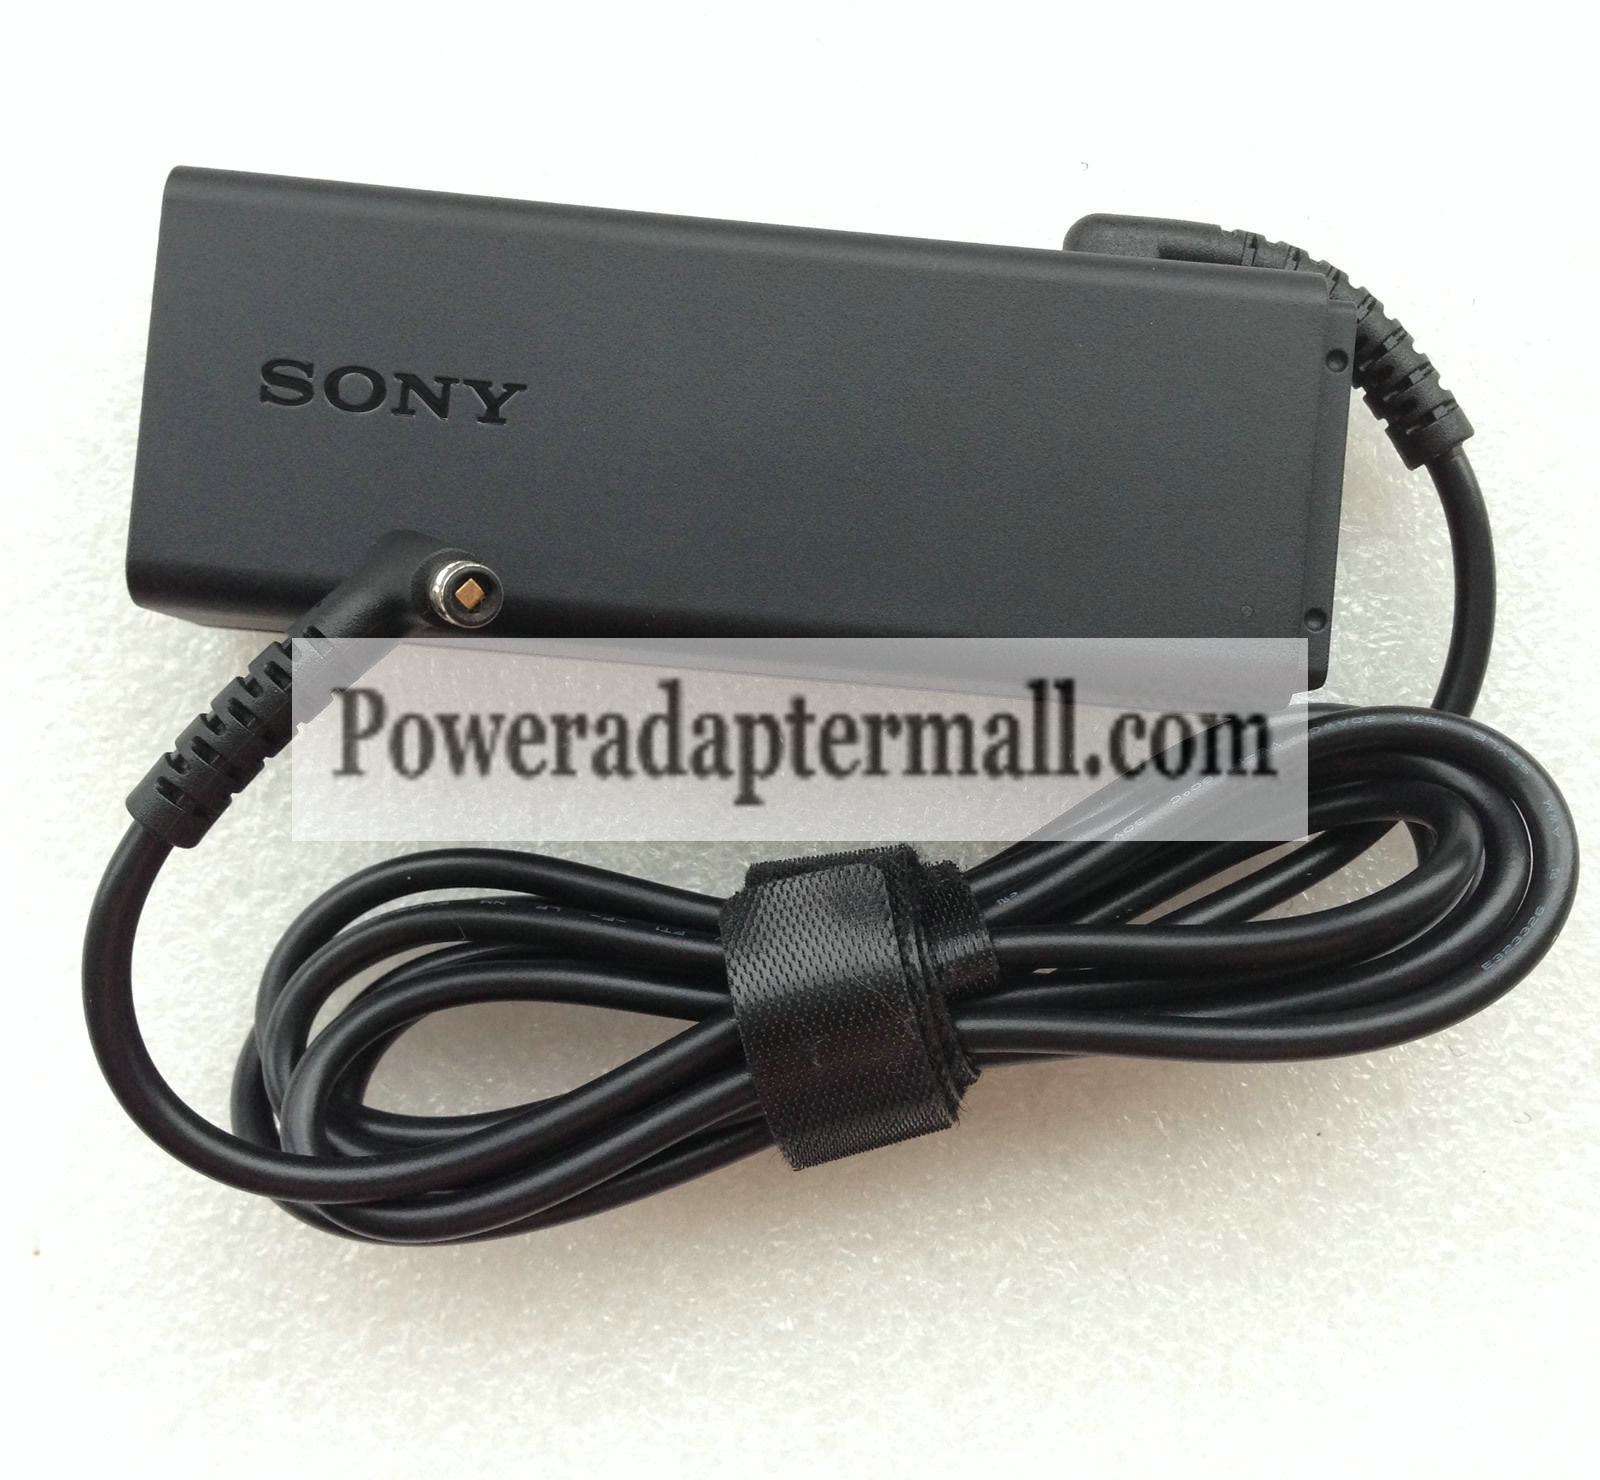 Genuine 19.5V/5V Sony VAIO Tap 11 SVT1122A4RW AC Adapter Charger